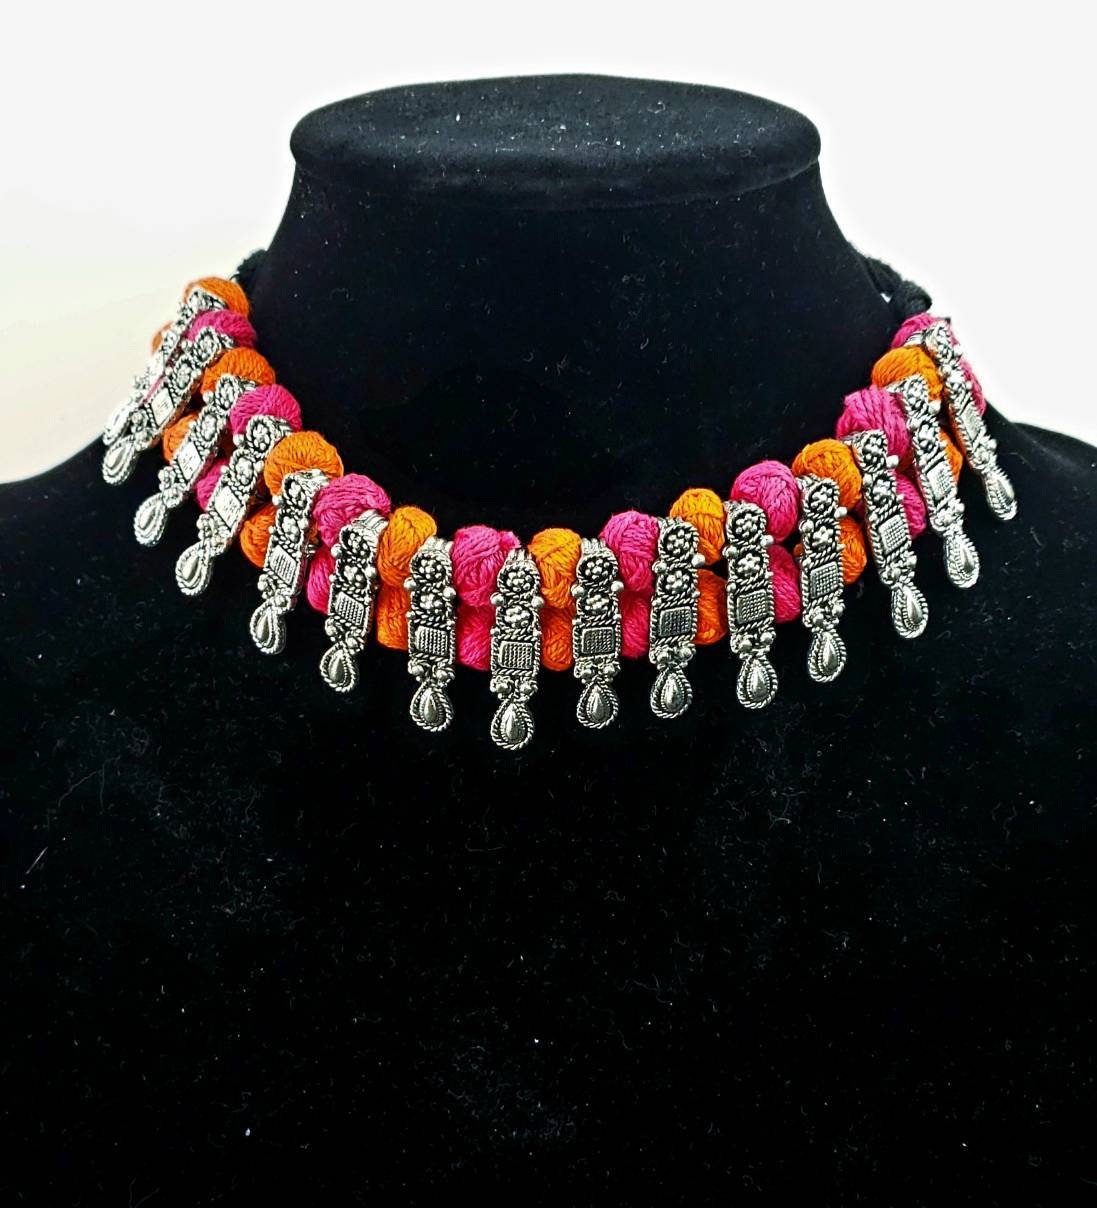 Afghani choker, Afghani jewelry, thread necklace, colorful choker, tribal  jewelry, bohemian necklace, ethnic jewelry, oxidized silver, India